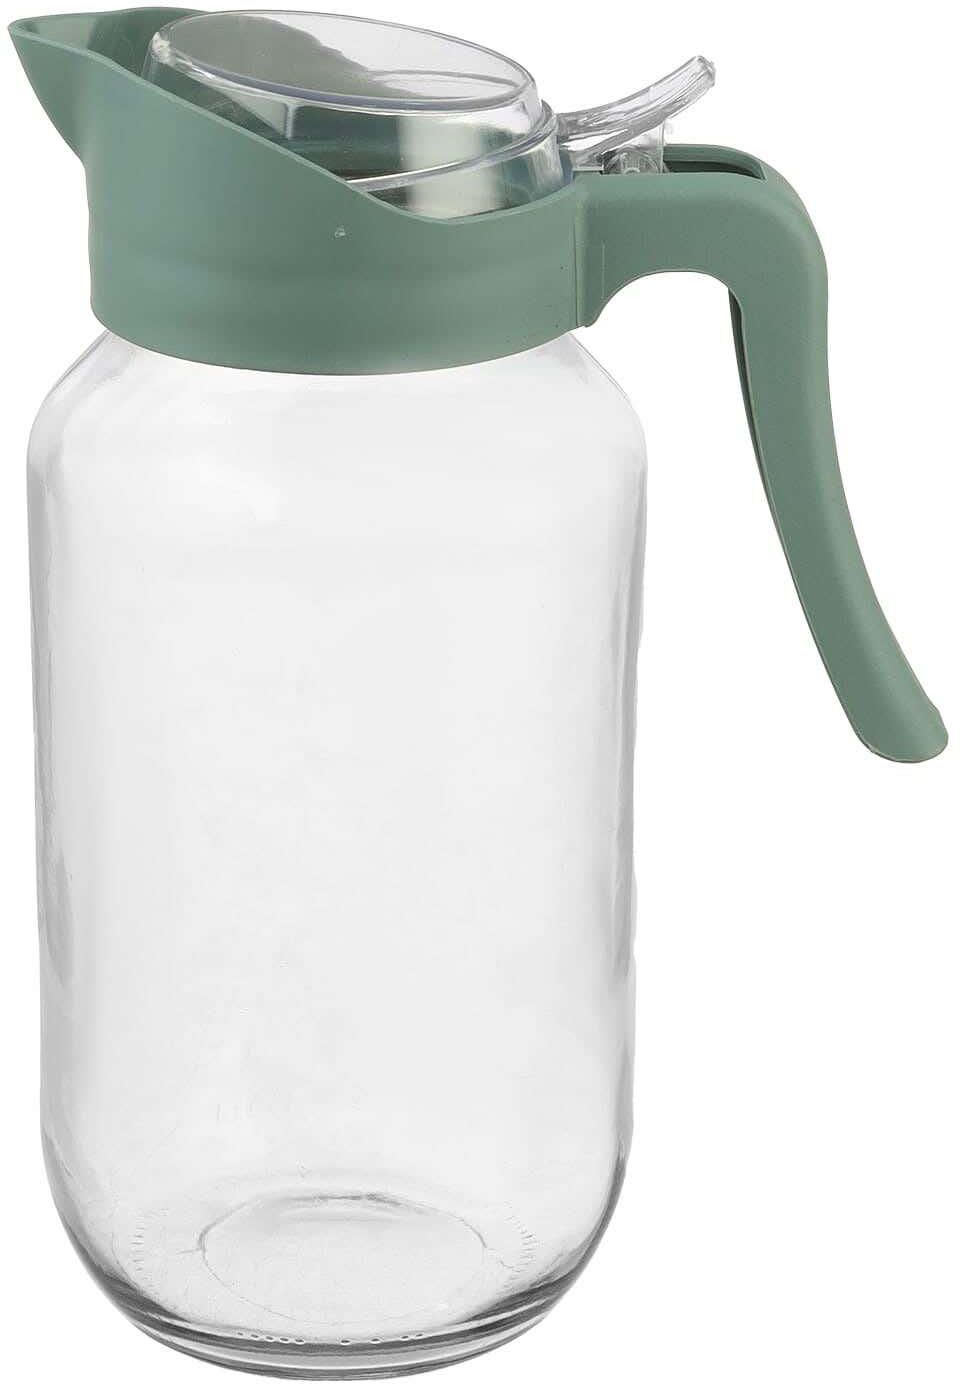 Get Elsedeq Glass Jug With Acrylic Lid, 1.5 Liters - Olive Clear with best offers | Raneen.com